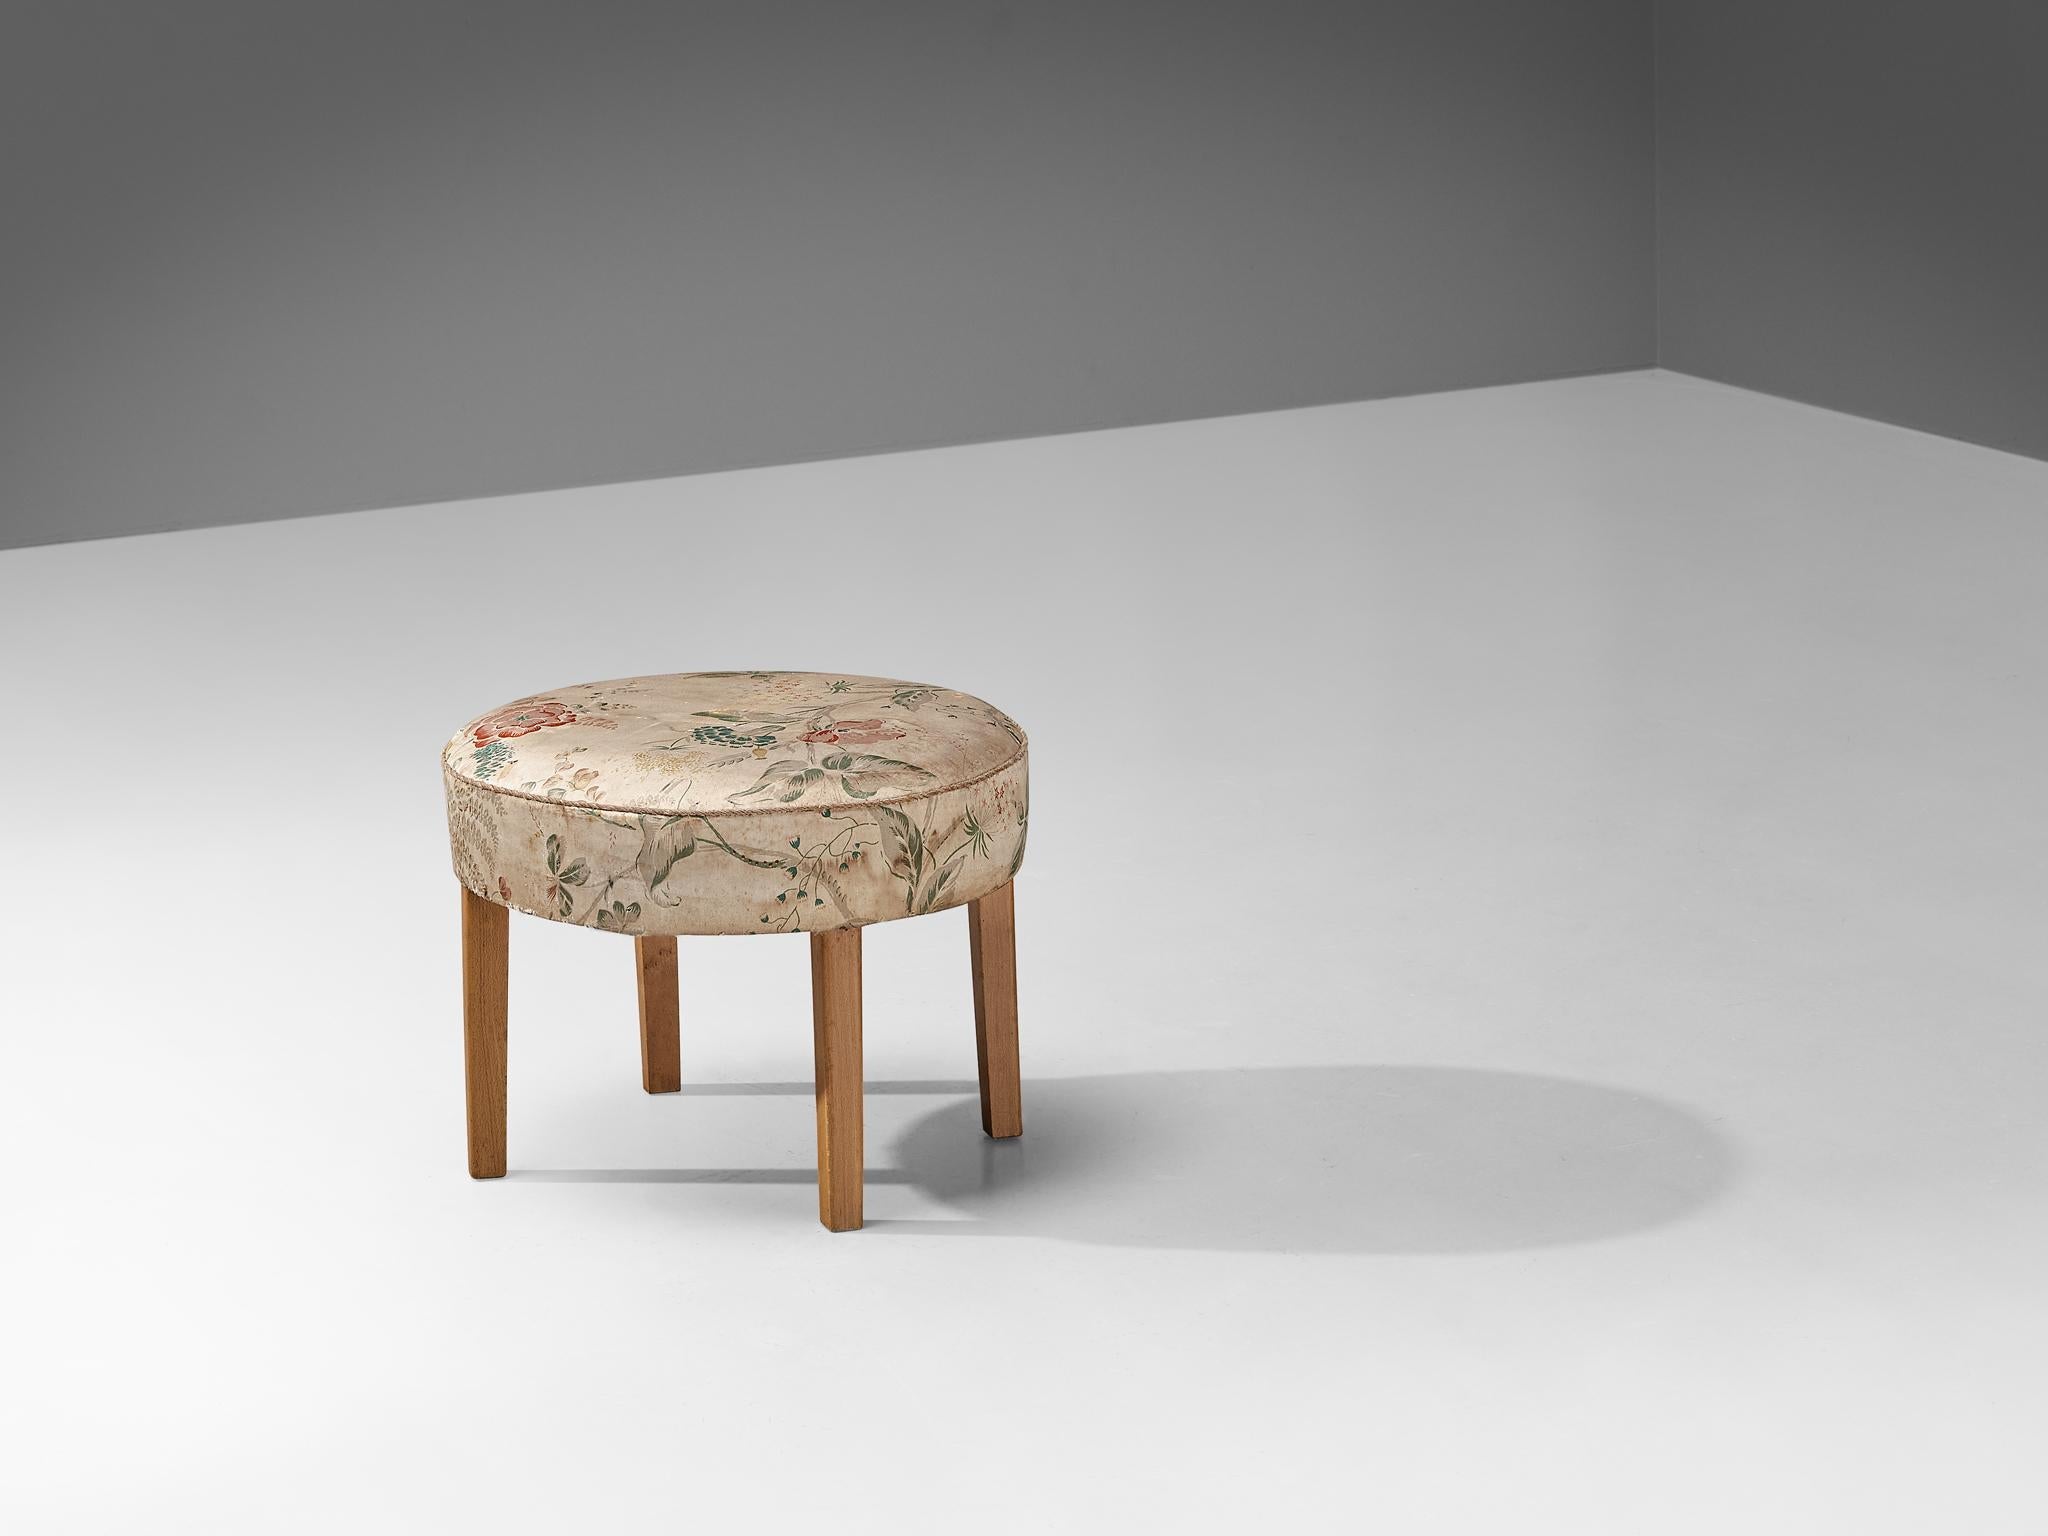 Scandinavian Stool in Floral Upholstery